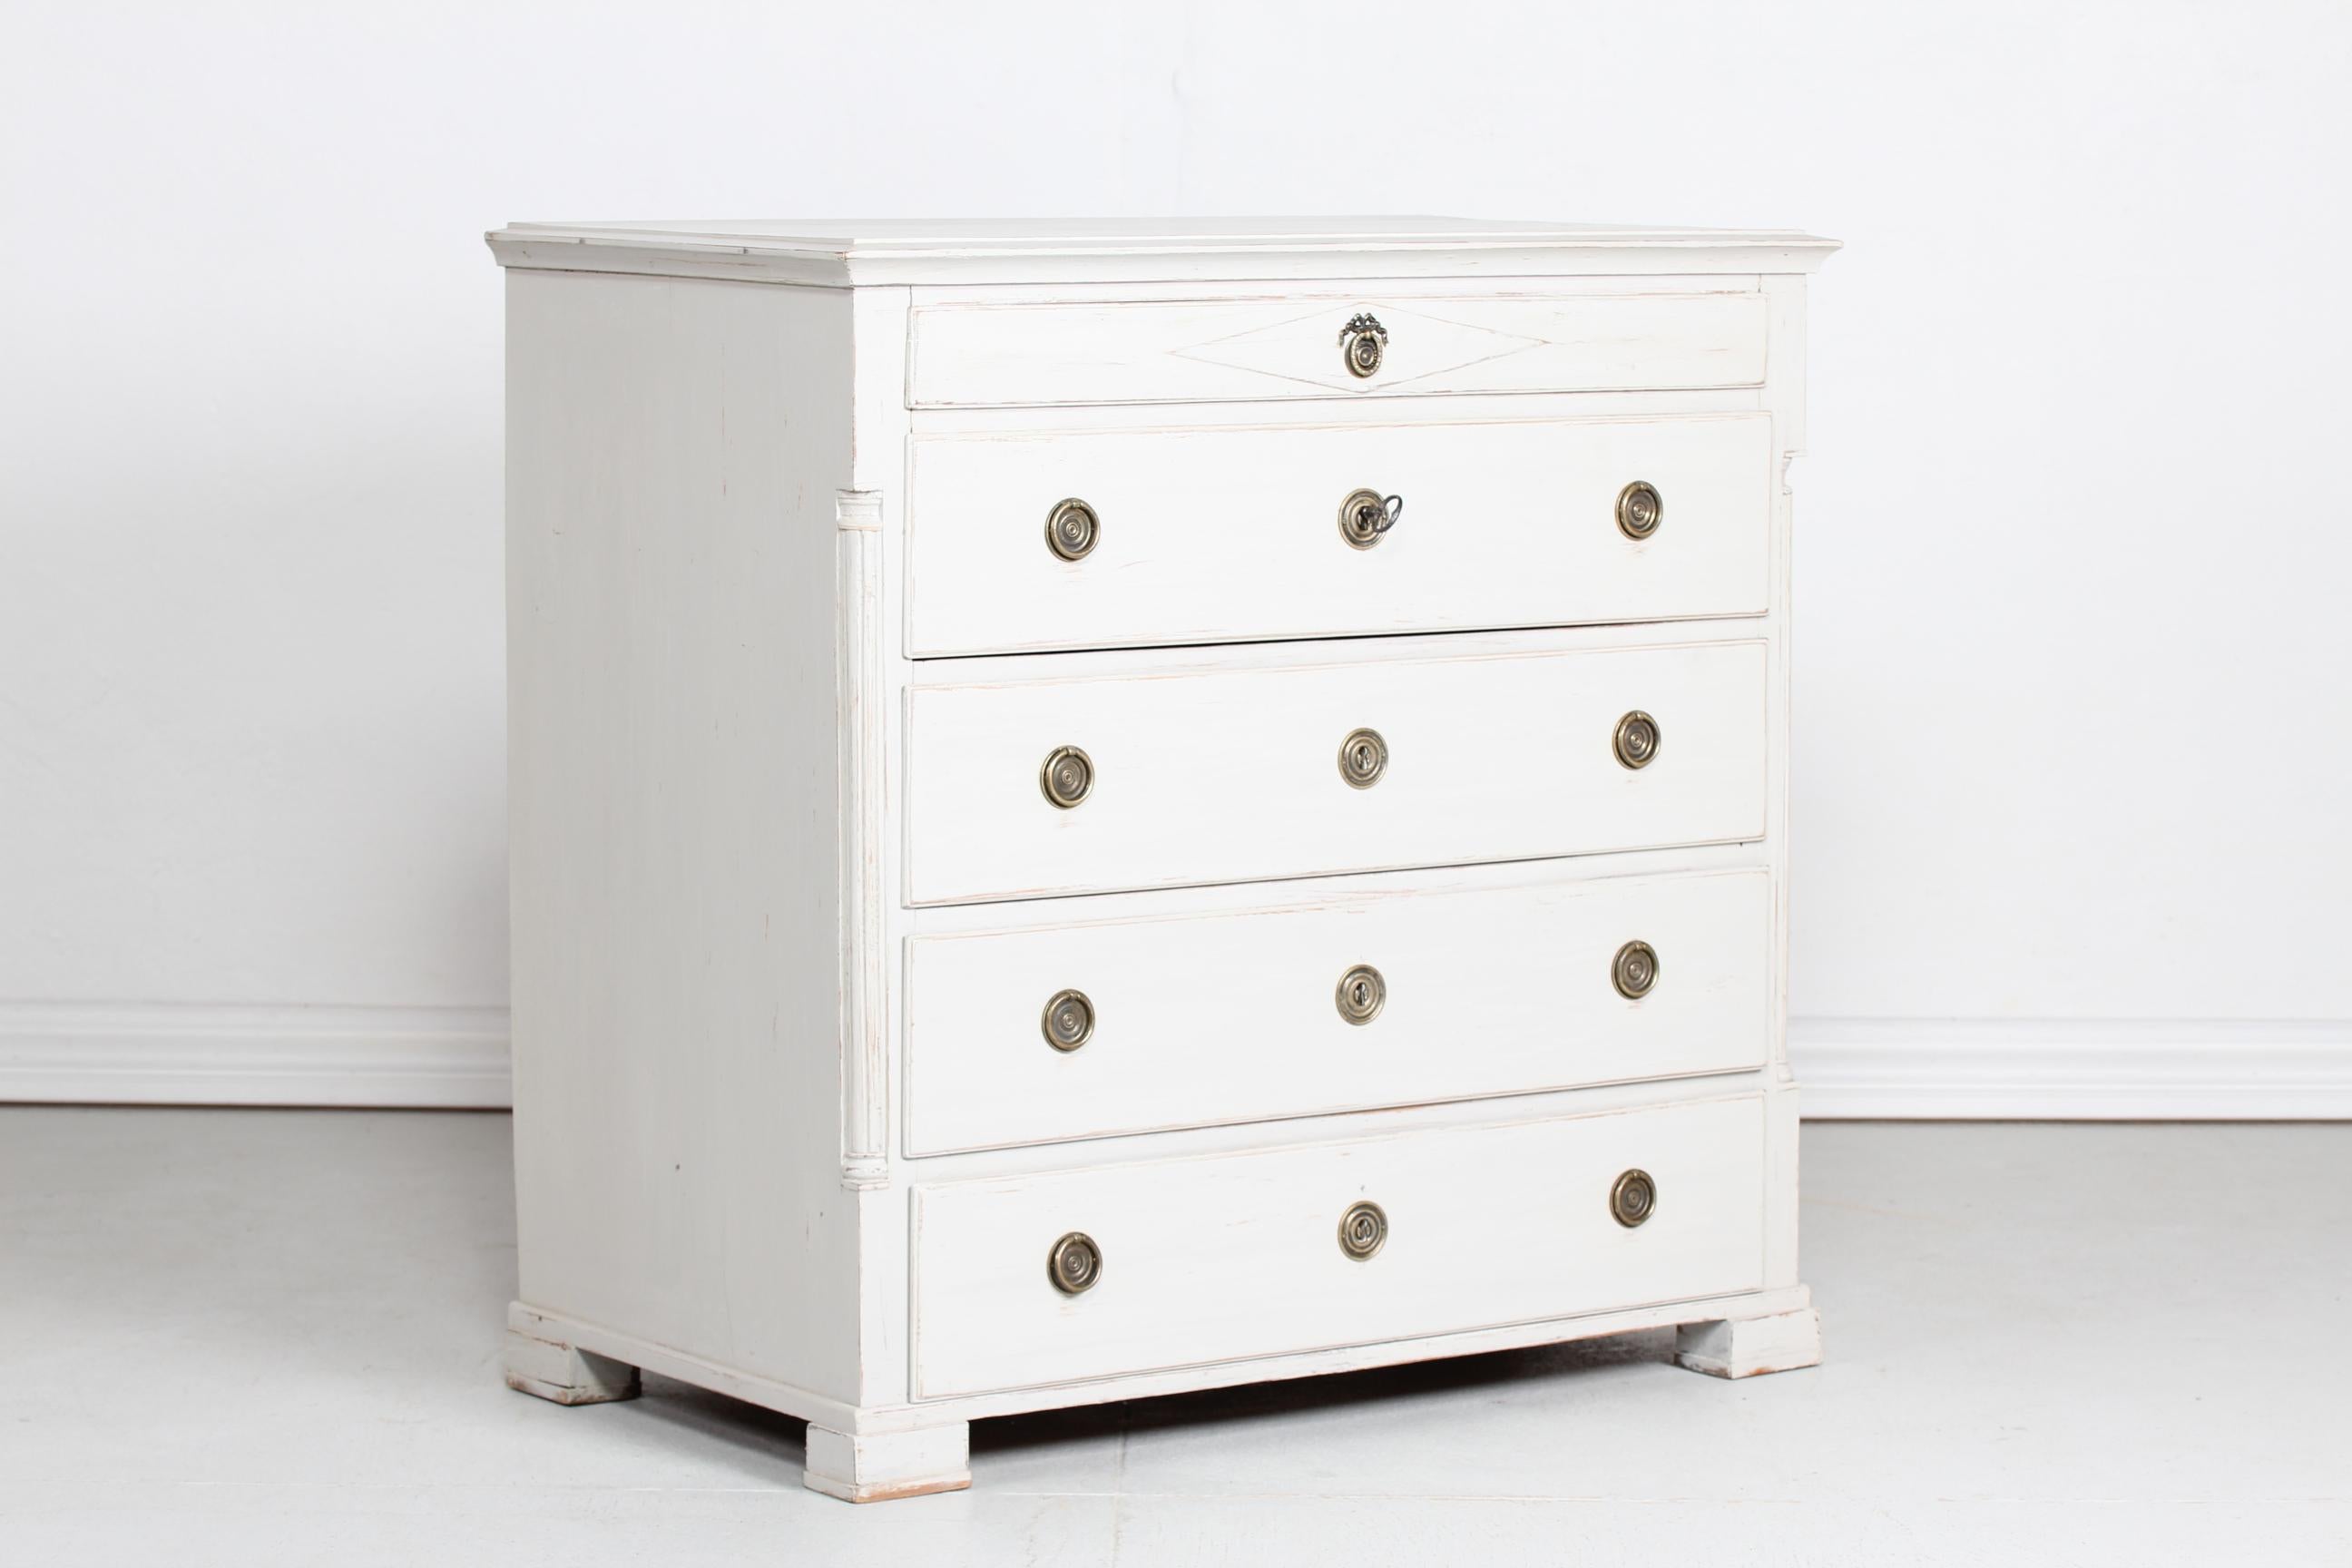 Danish Louis XVI Seize style chest of drawers made circa 1880 of solid pine wood. 
It has been hand painted with light grey paint and patina and later brass handles

Nice antique condition with good patina.
The key, drawers and locks are with